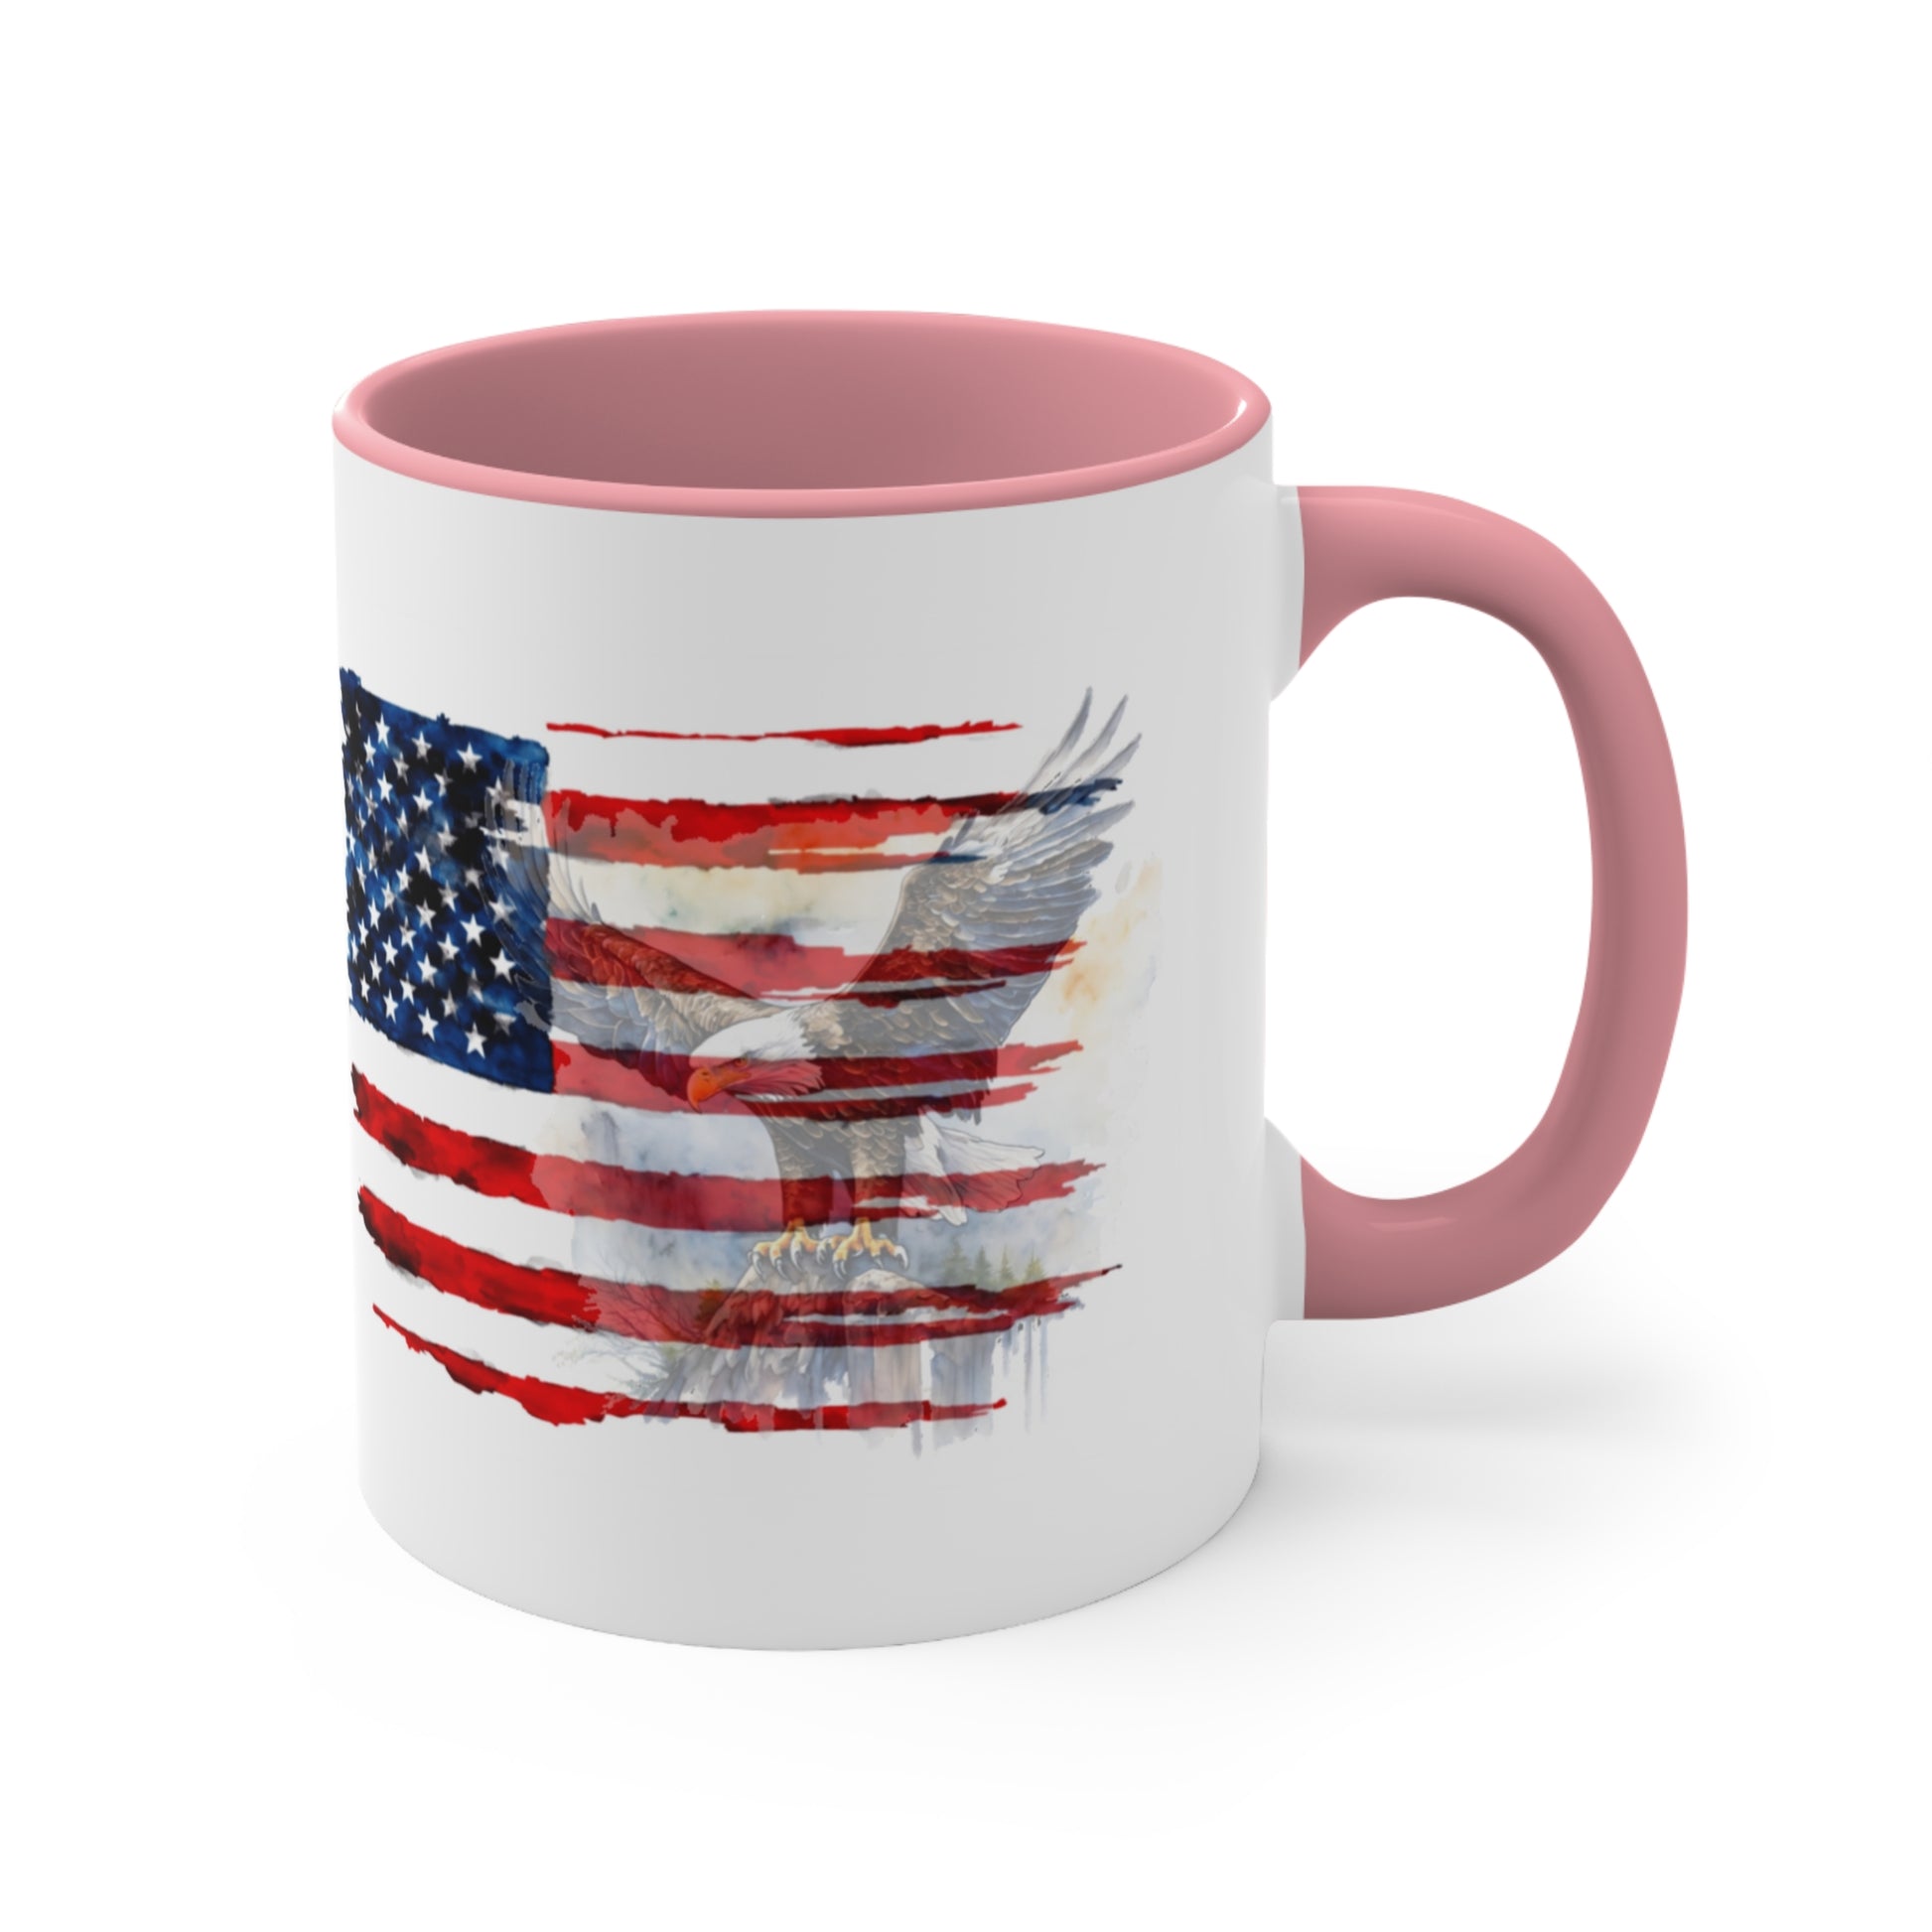 Coffee Mug with US Flag and eagle 11 oz, front view in pink.